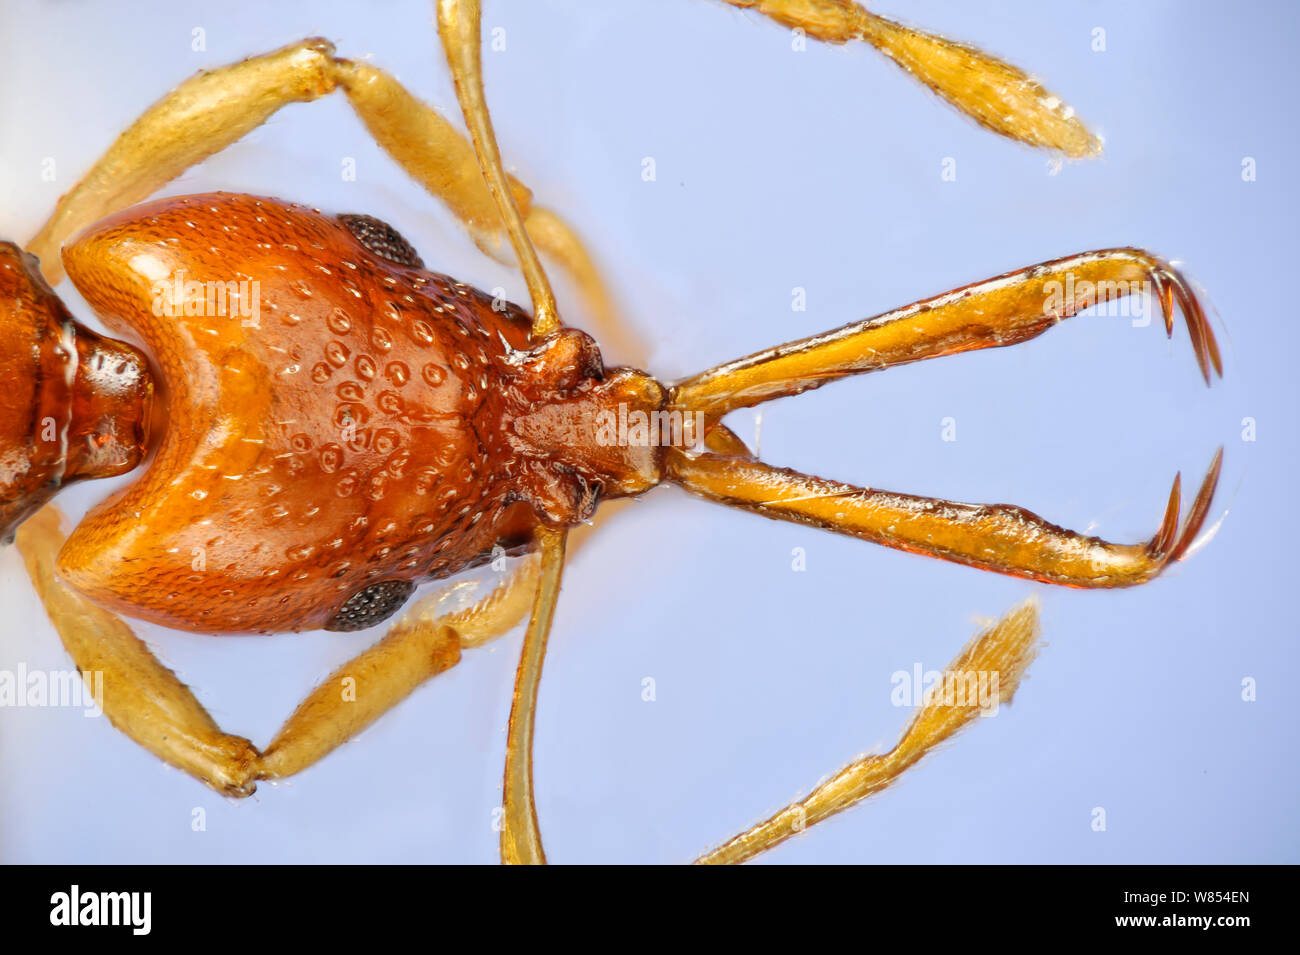 Close up of ant head (Acanthognathus brevicornis) showing mandibles used to strike prey, from Rio Grande do Sul, Brazil. Specimen photographed using digital focus stacking Stock Photo